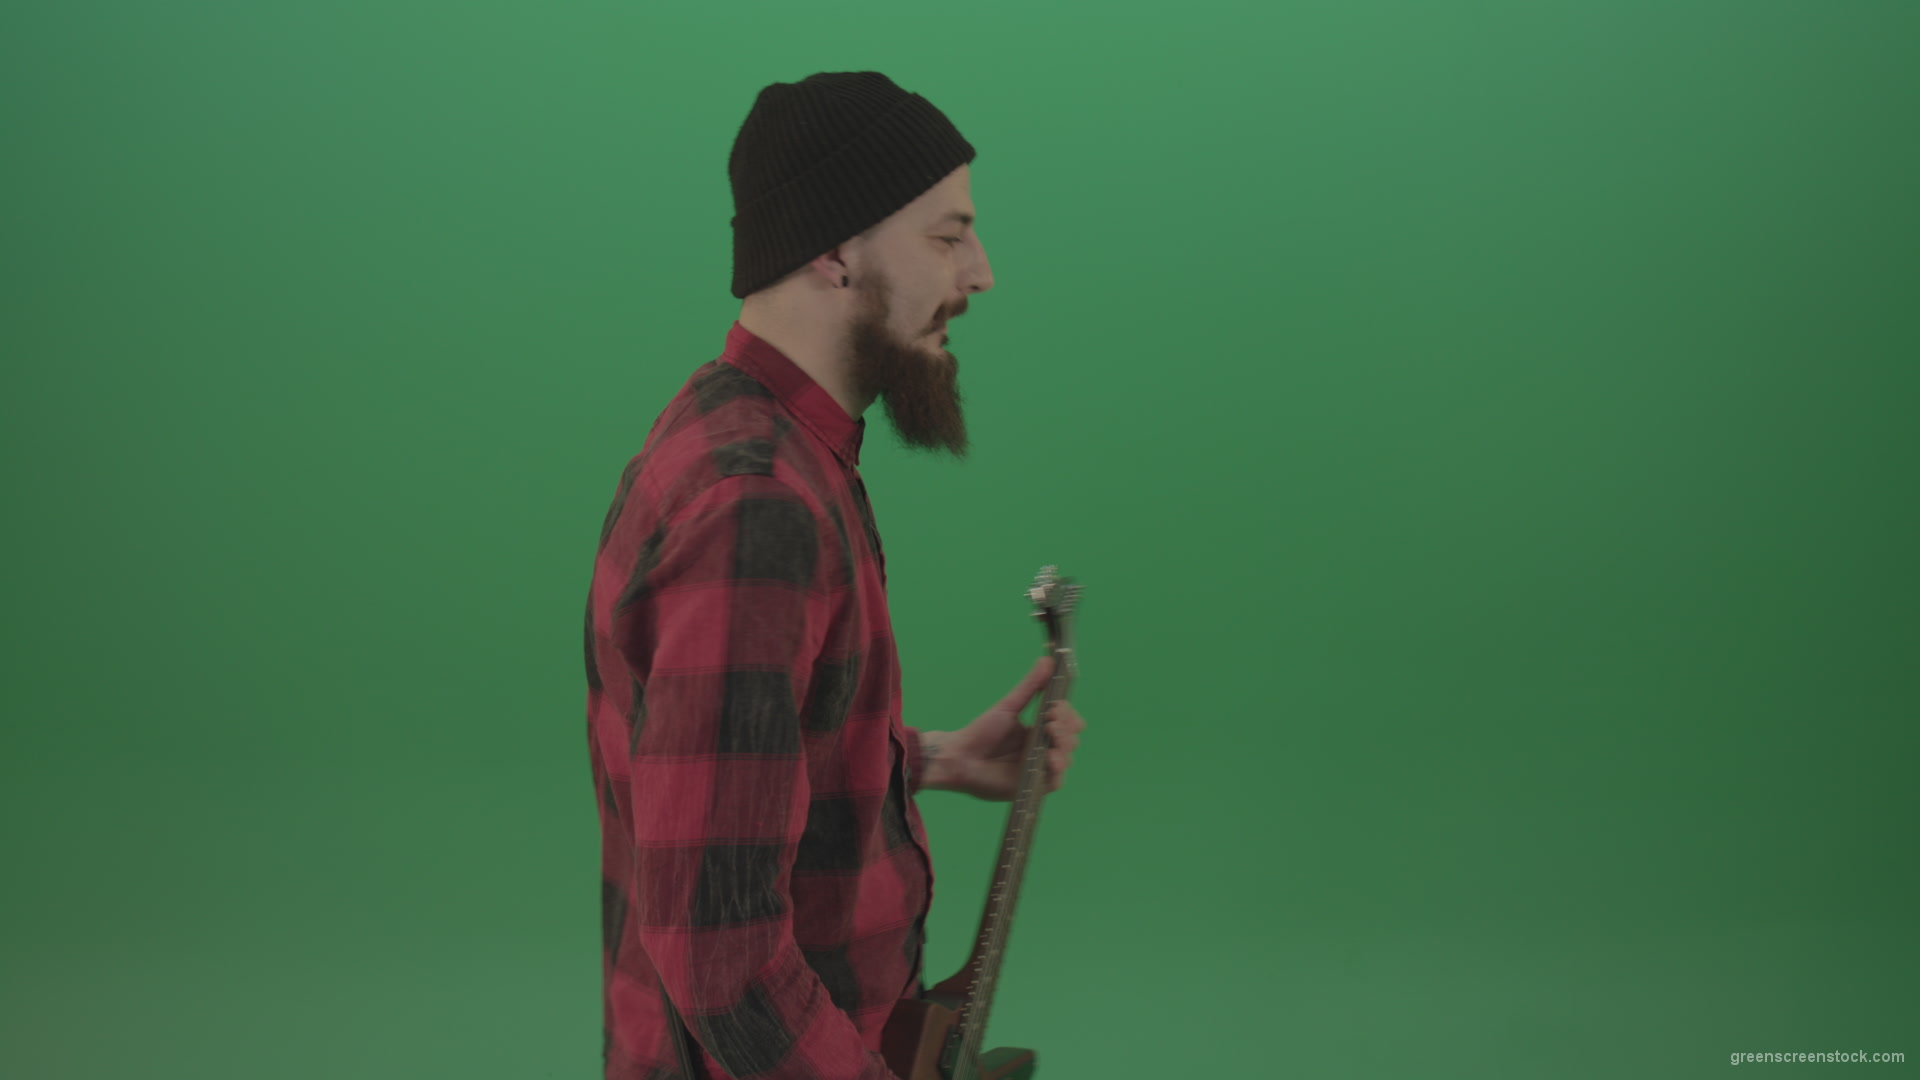 Angry-punk-rock-man-guitarist-play-guitar-and-scream-death-hardcore-music-isolated-on-green-screen_002 Green Screen Stock